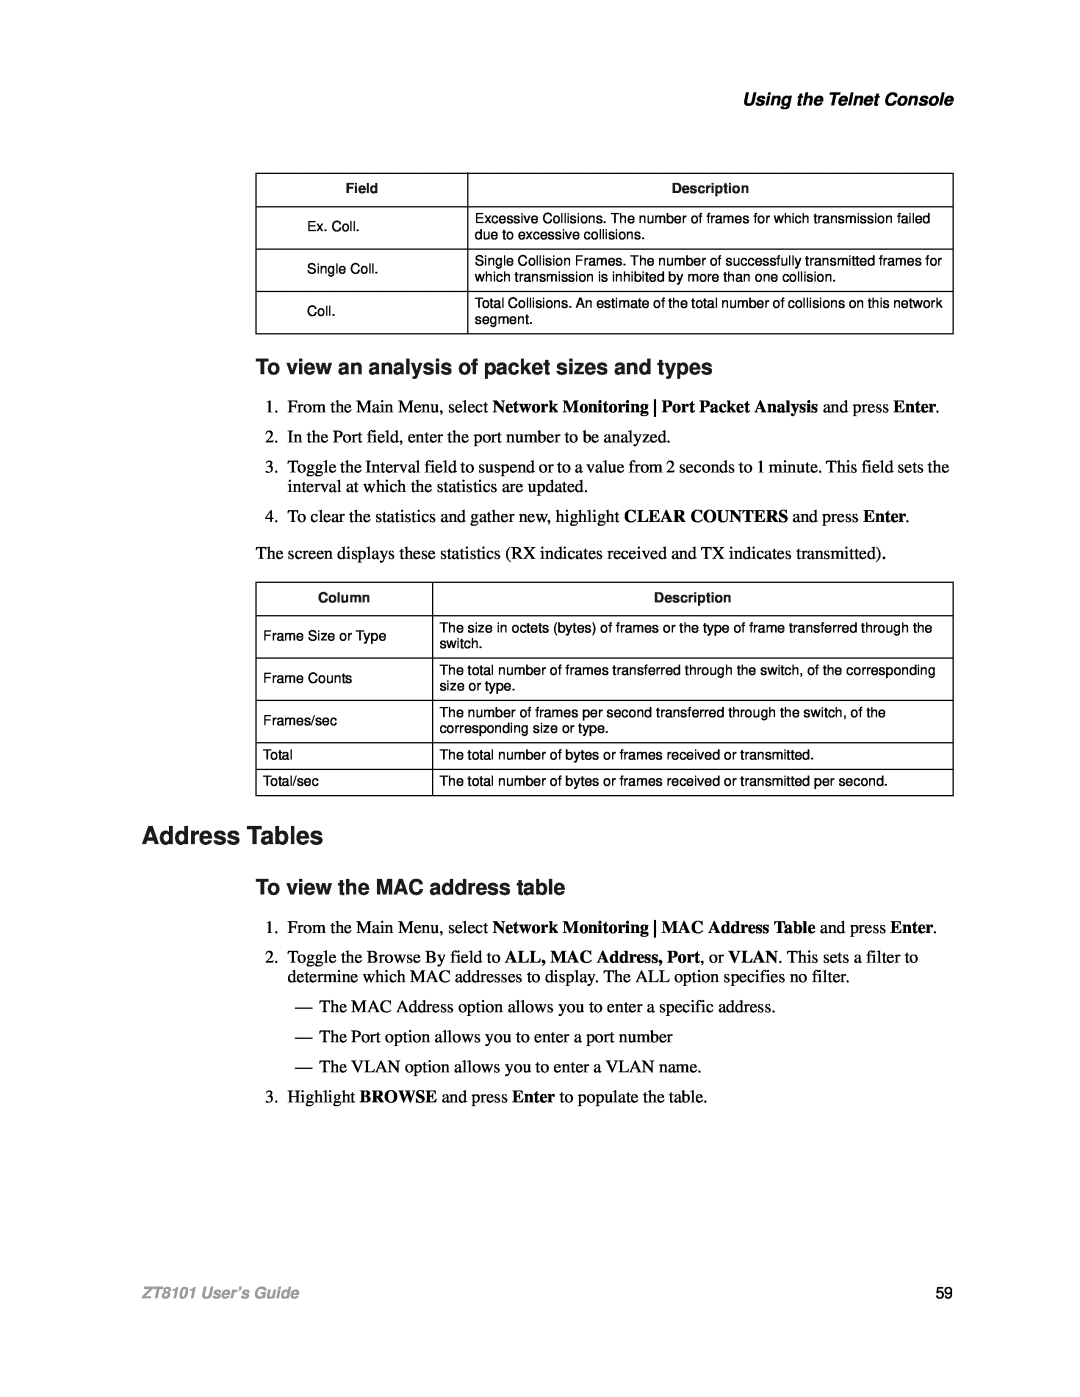 Intel ZT8101 user manual Address Tables, To view an analysis of packet sizes and types, To view the MAC address table 